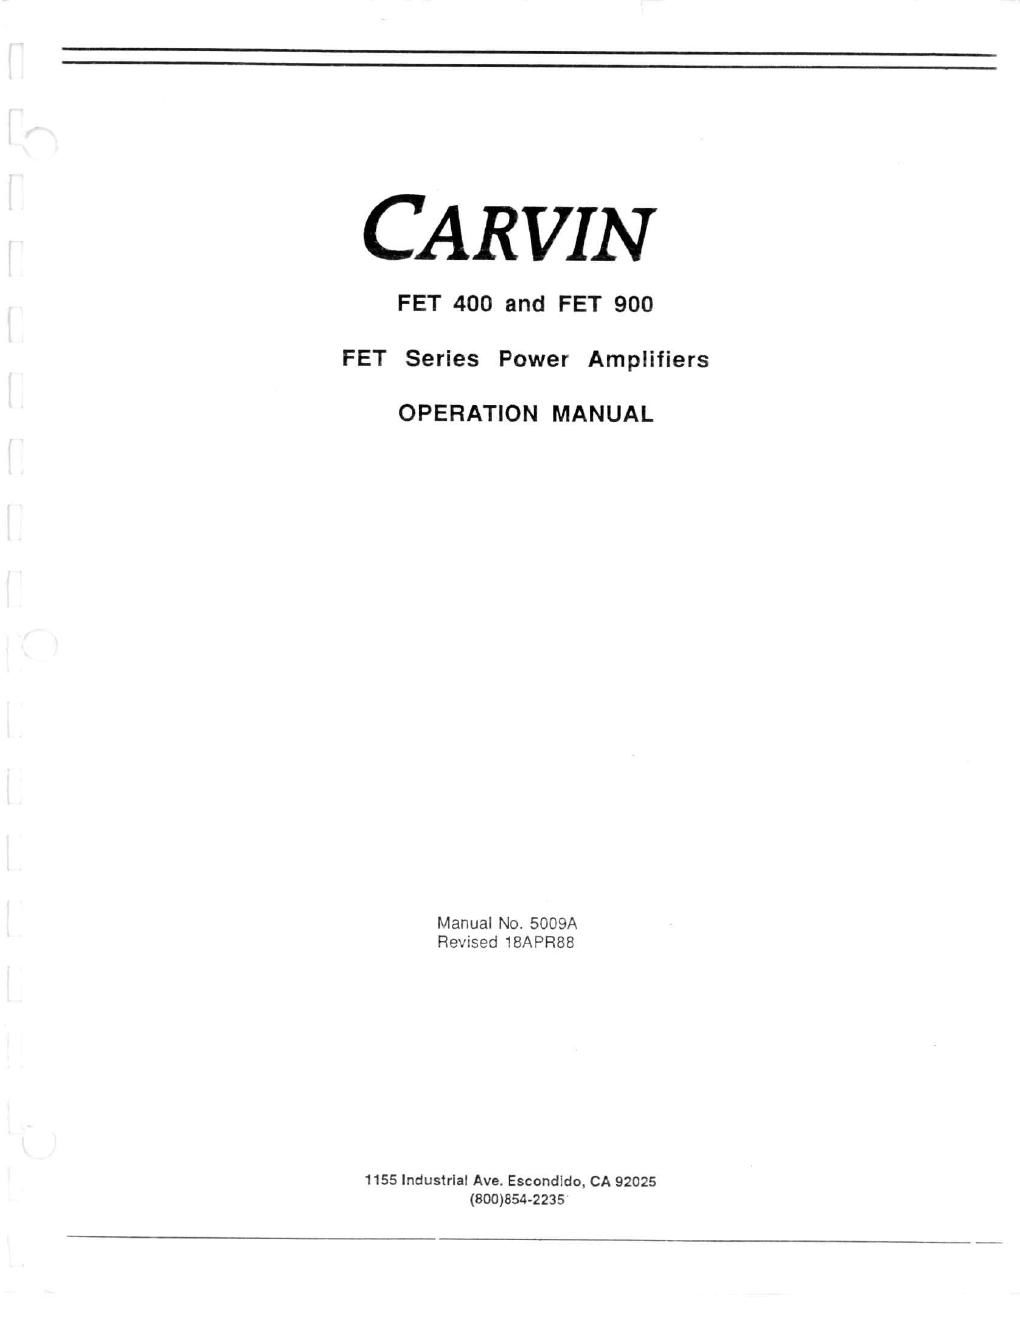 carvin fet 900 owners manual